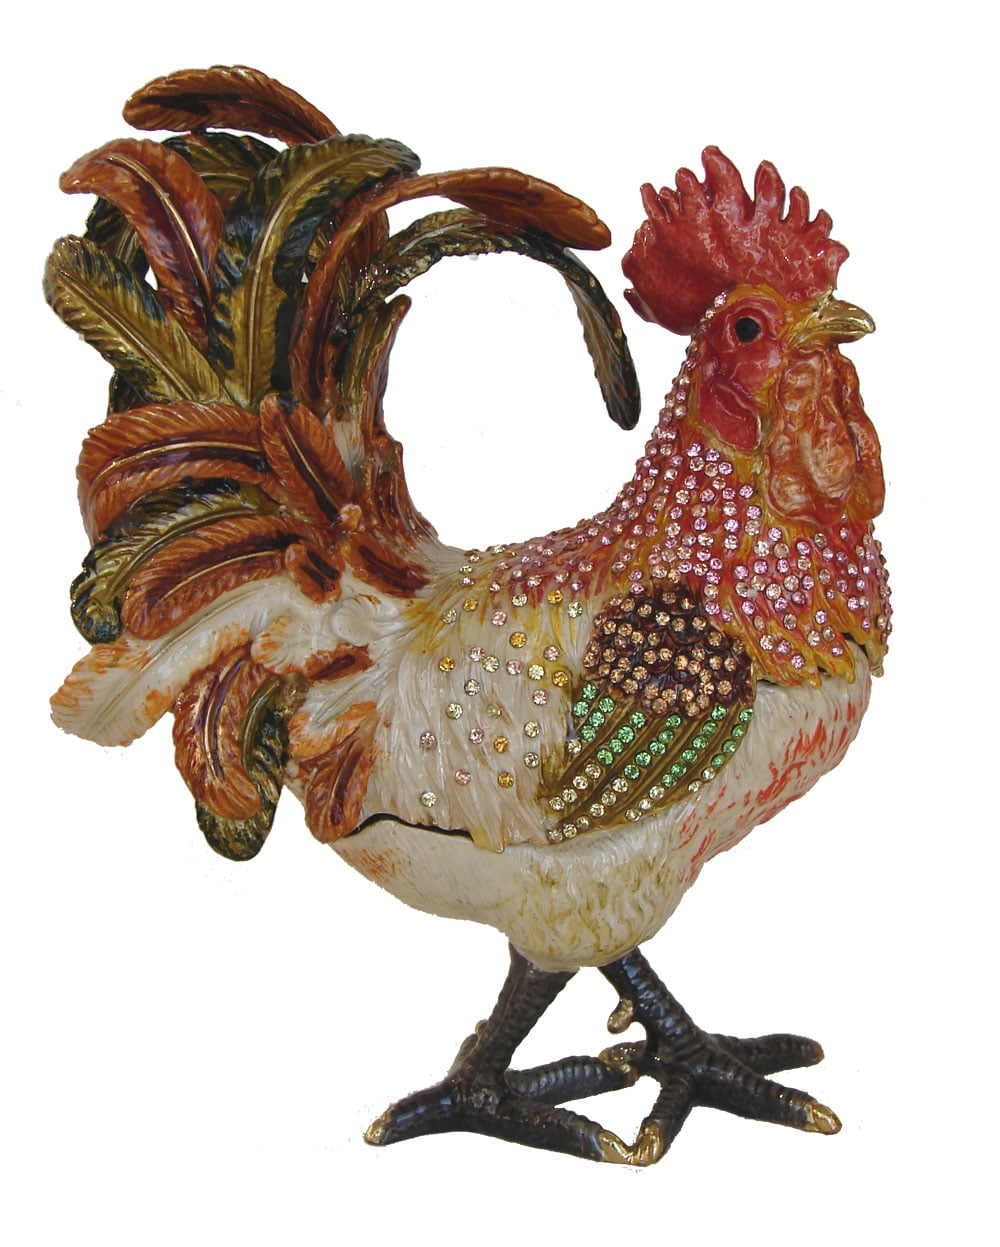 Big Bejeweled Rooster Statue 